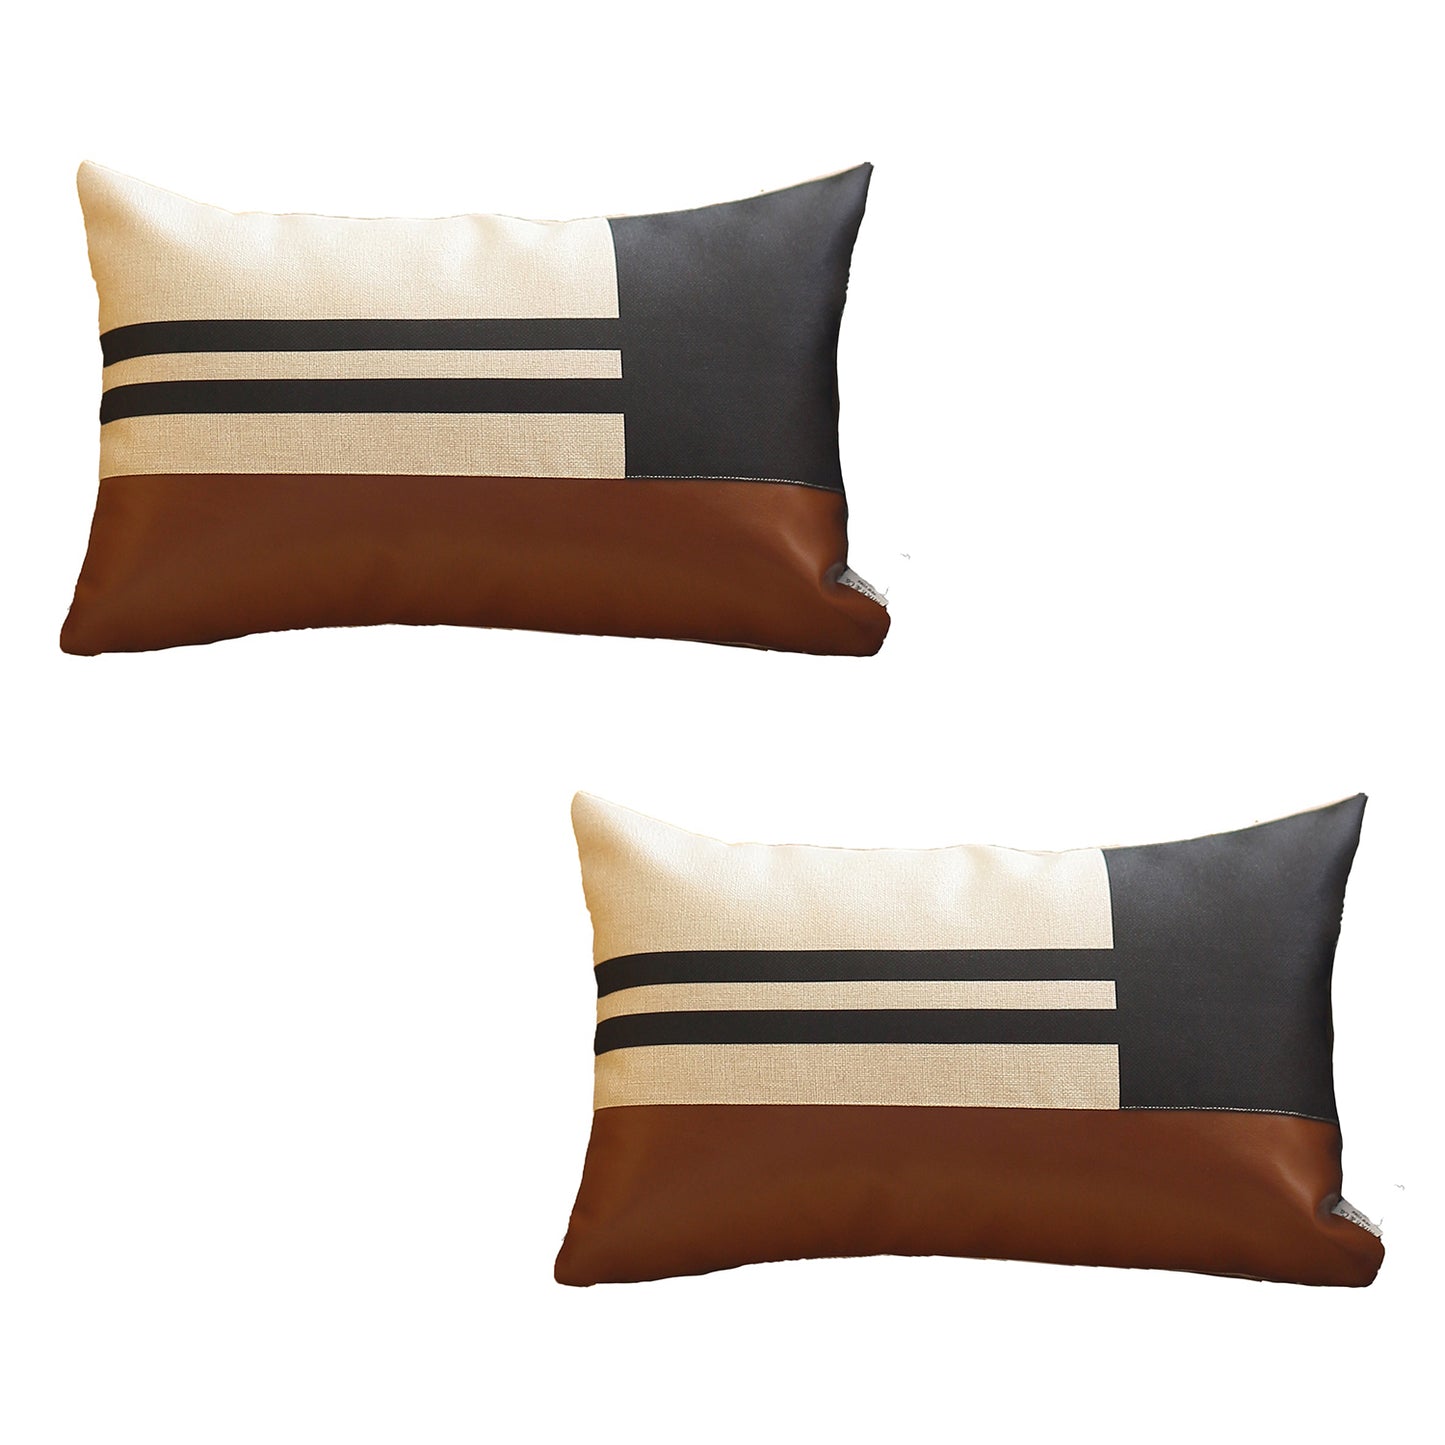 Boho-Chic Set of 2 Handcrafted Decorative Throw Pillow Cover Vegan Faux Leather Geometric Pillowcase for Couch, Bedding